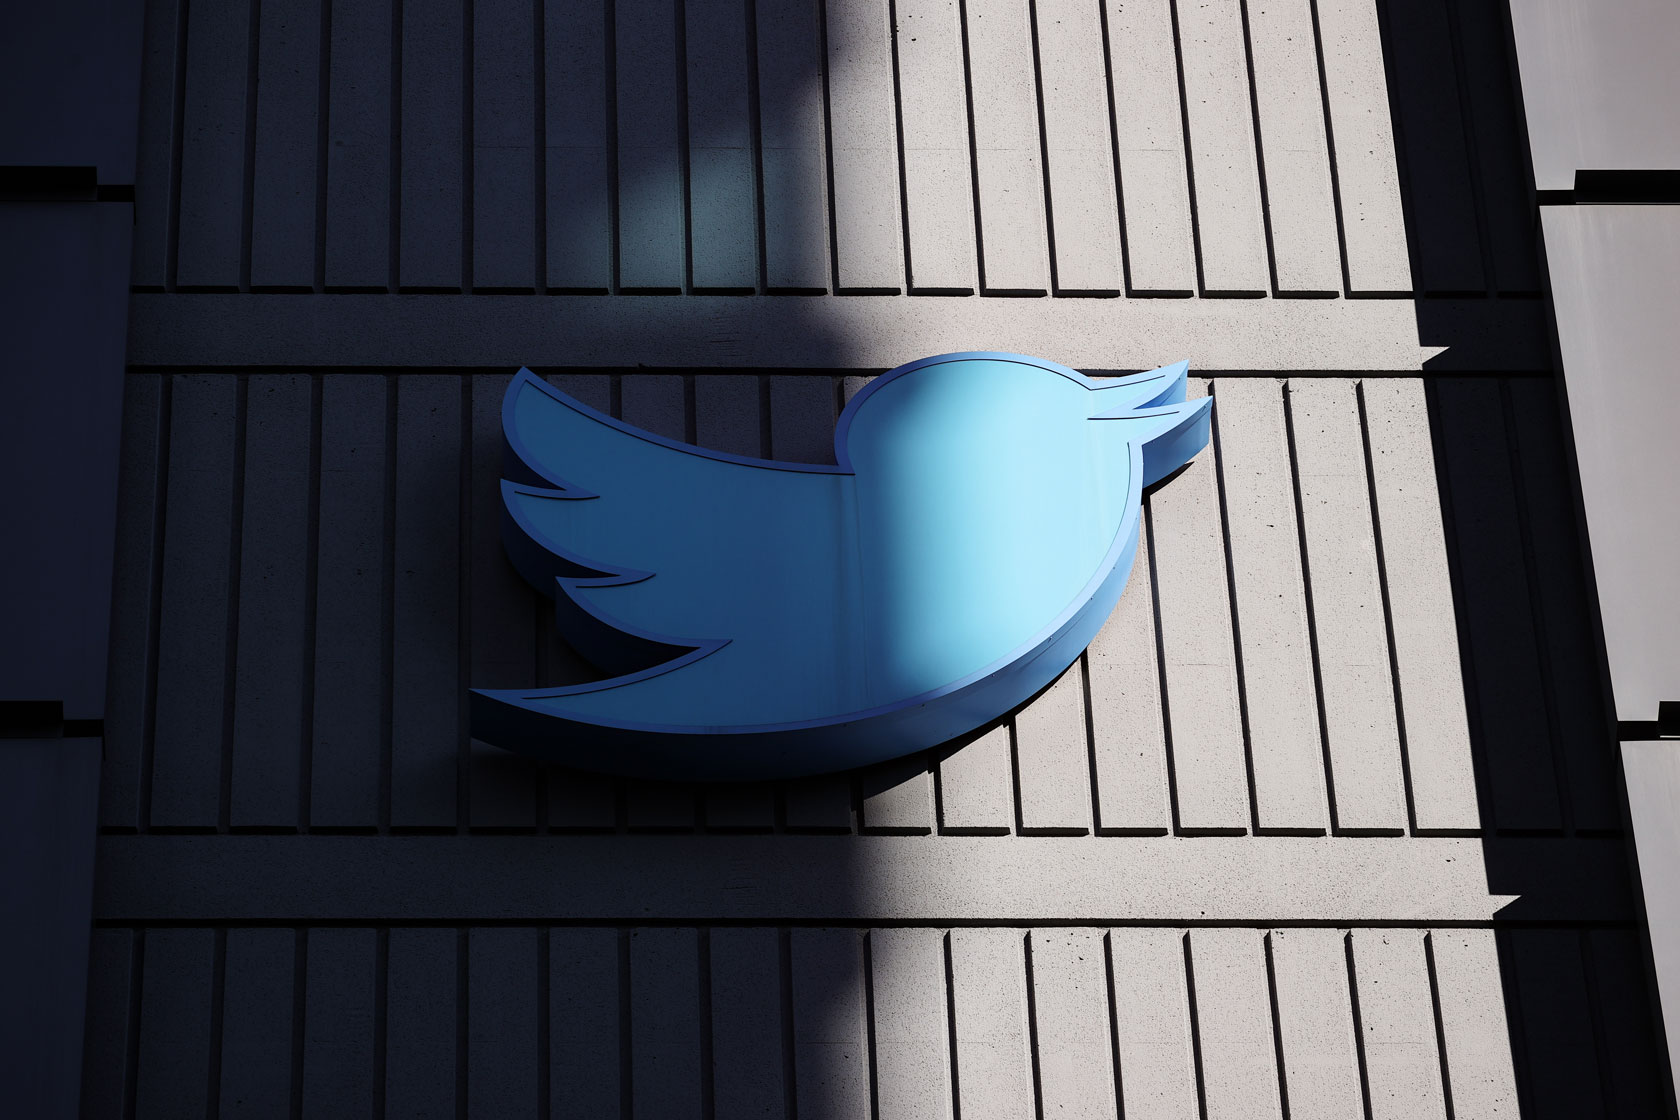 Photo shows the blue Twitter bird logo on the side of a building, partly covered by shade.